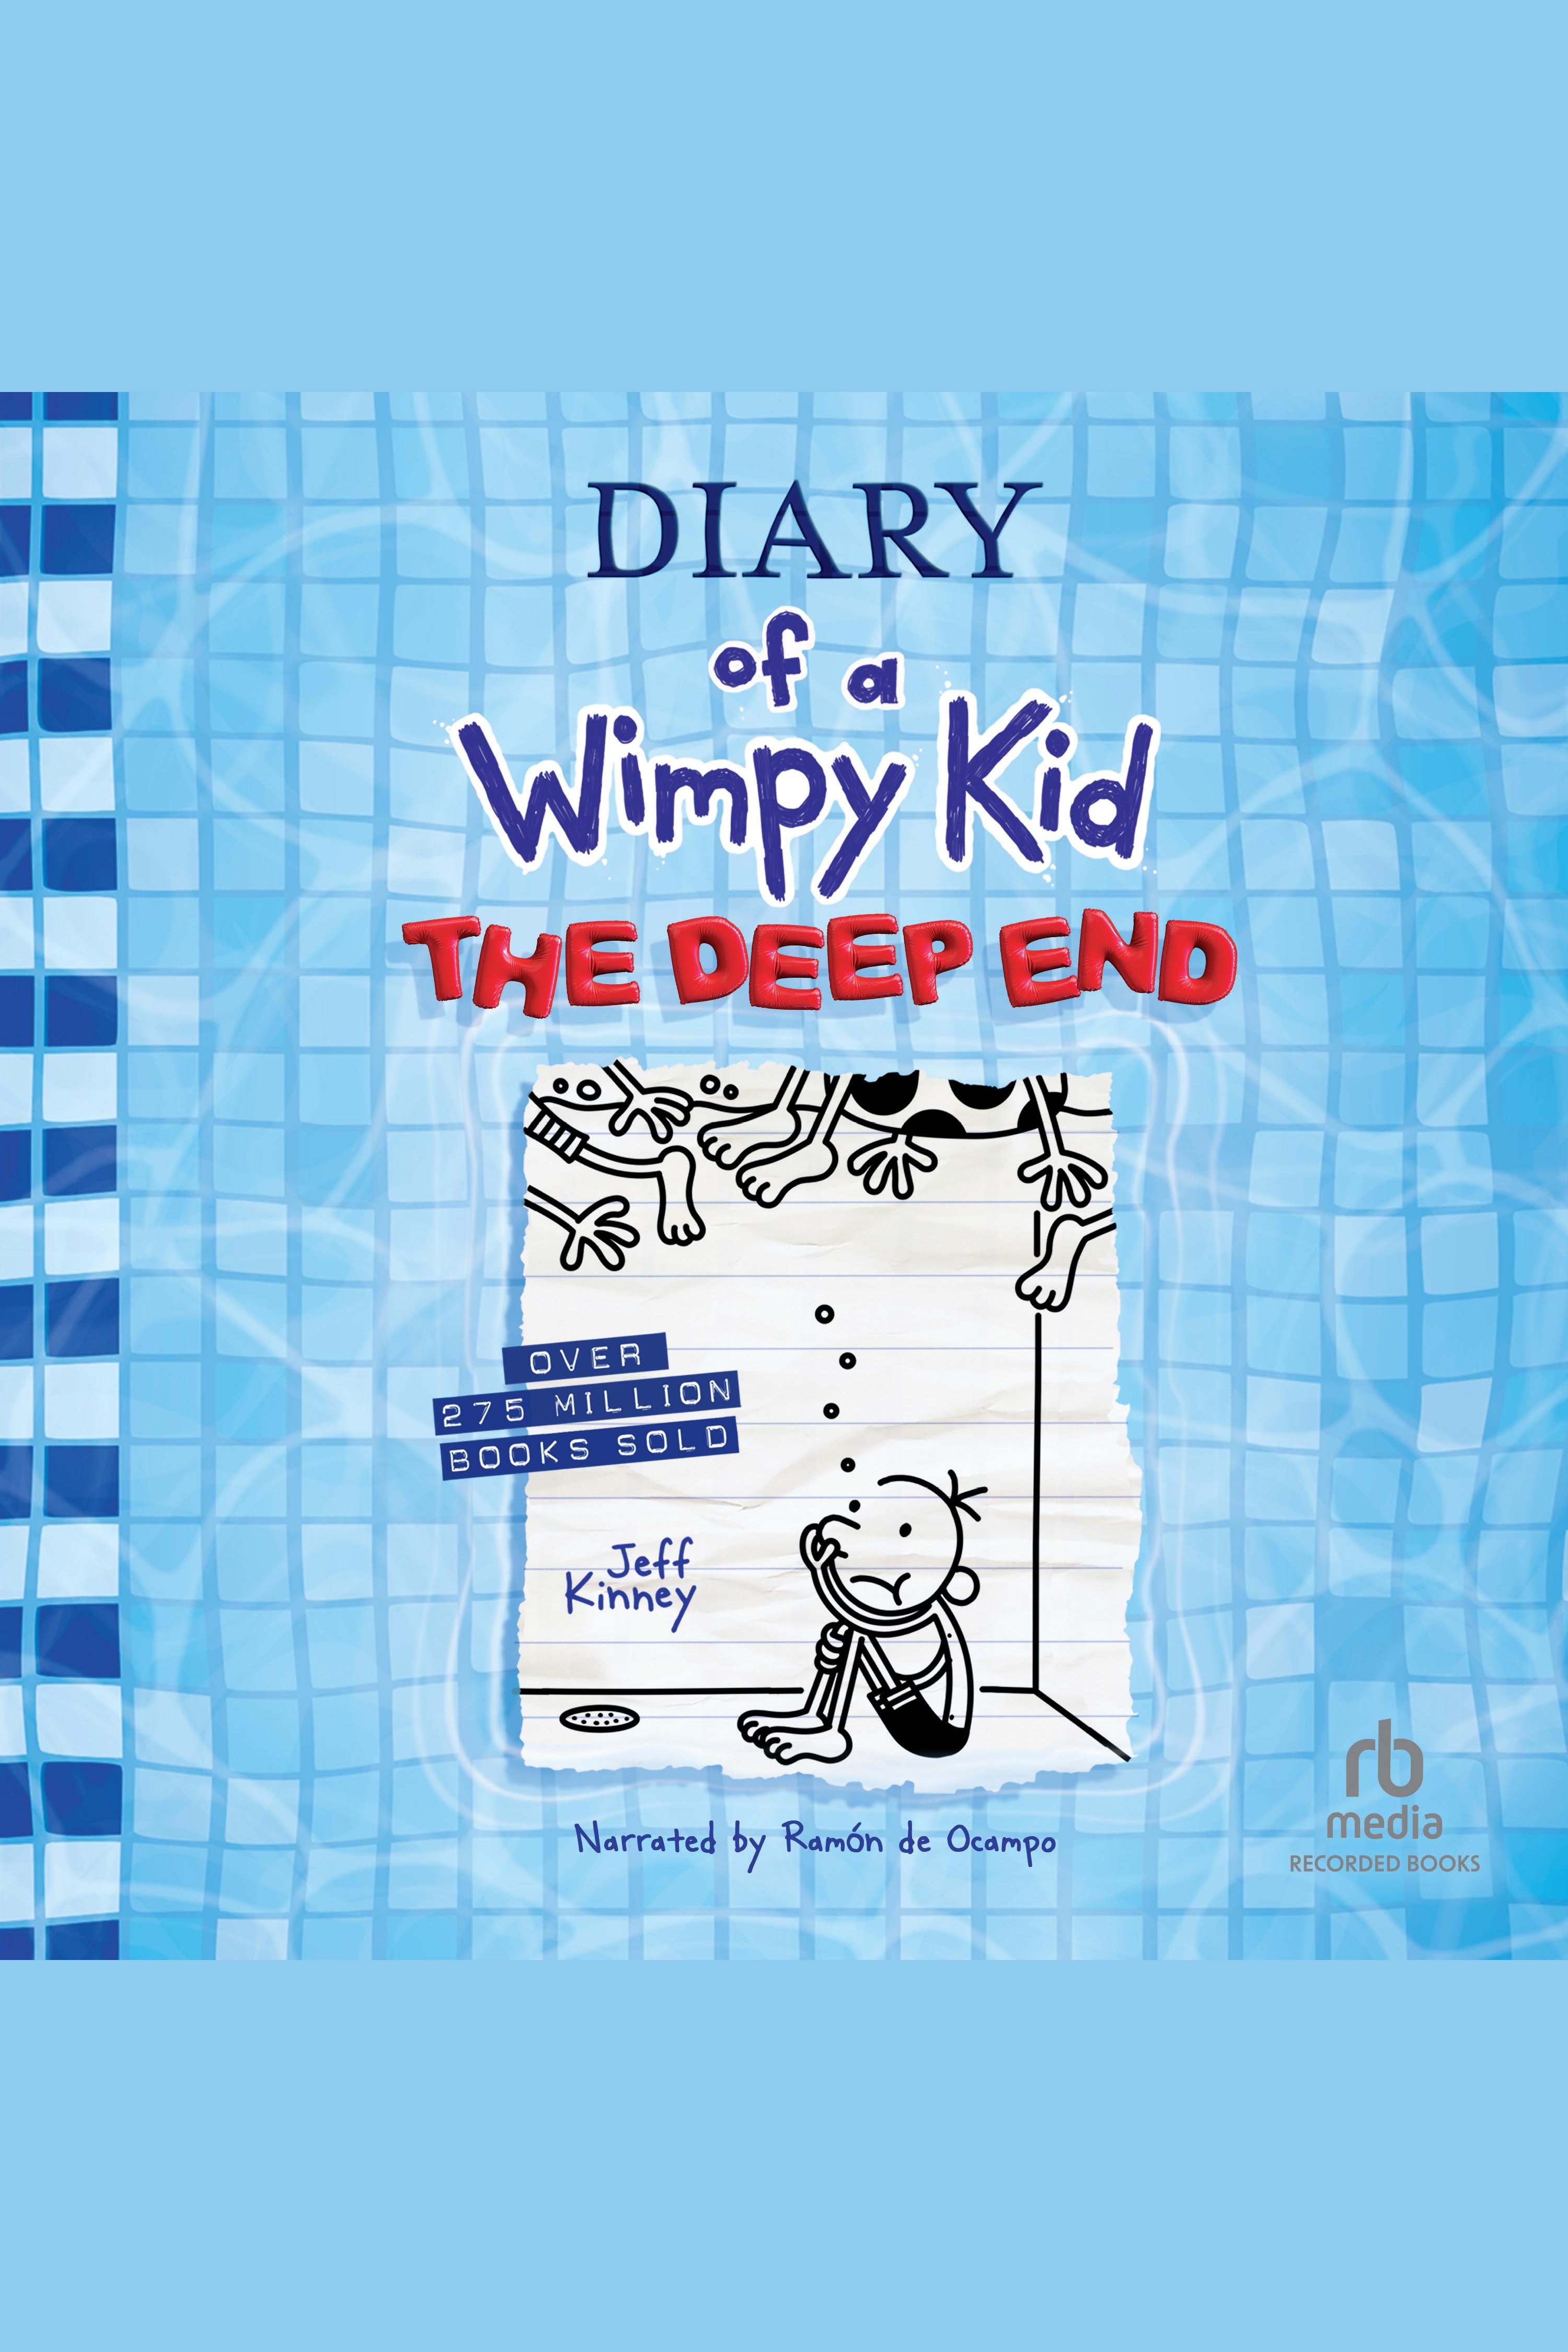 The Wimpy Kid Movie Diary by Jeff Kinney · OverDrive: ebooks